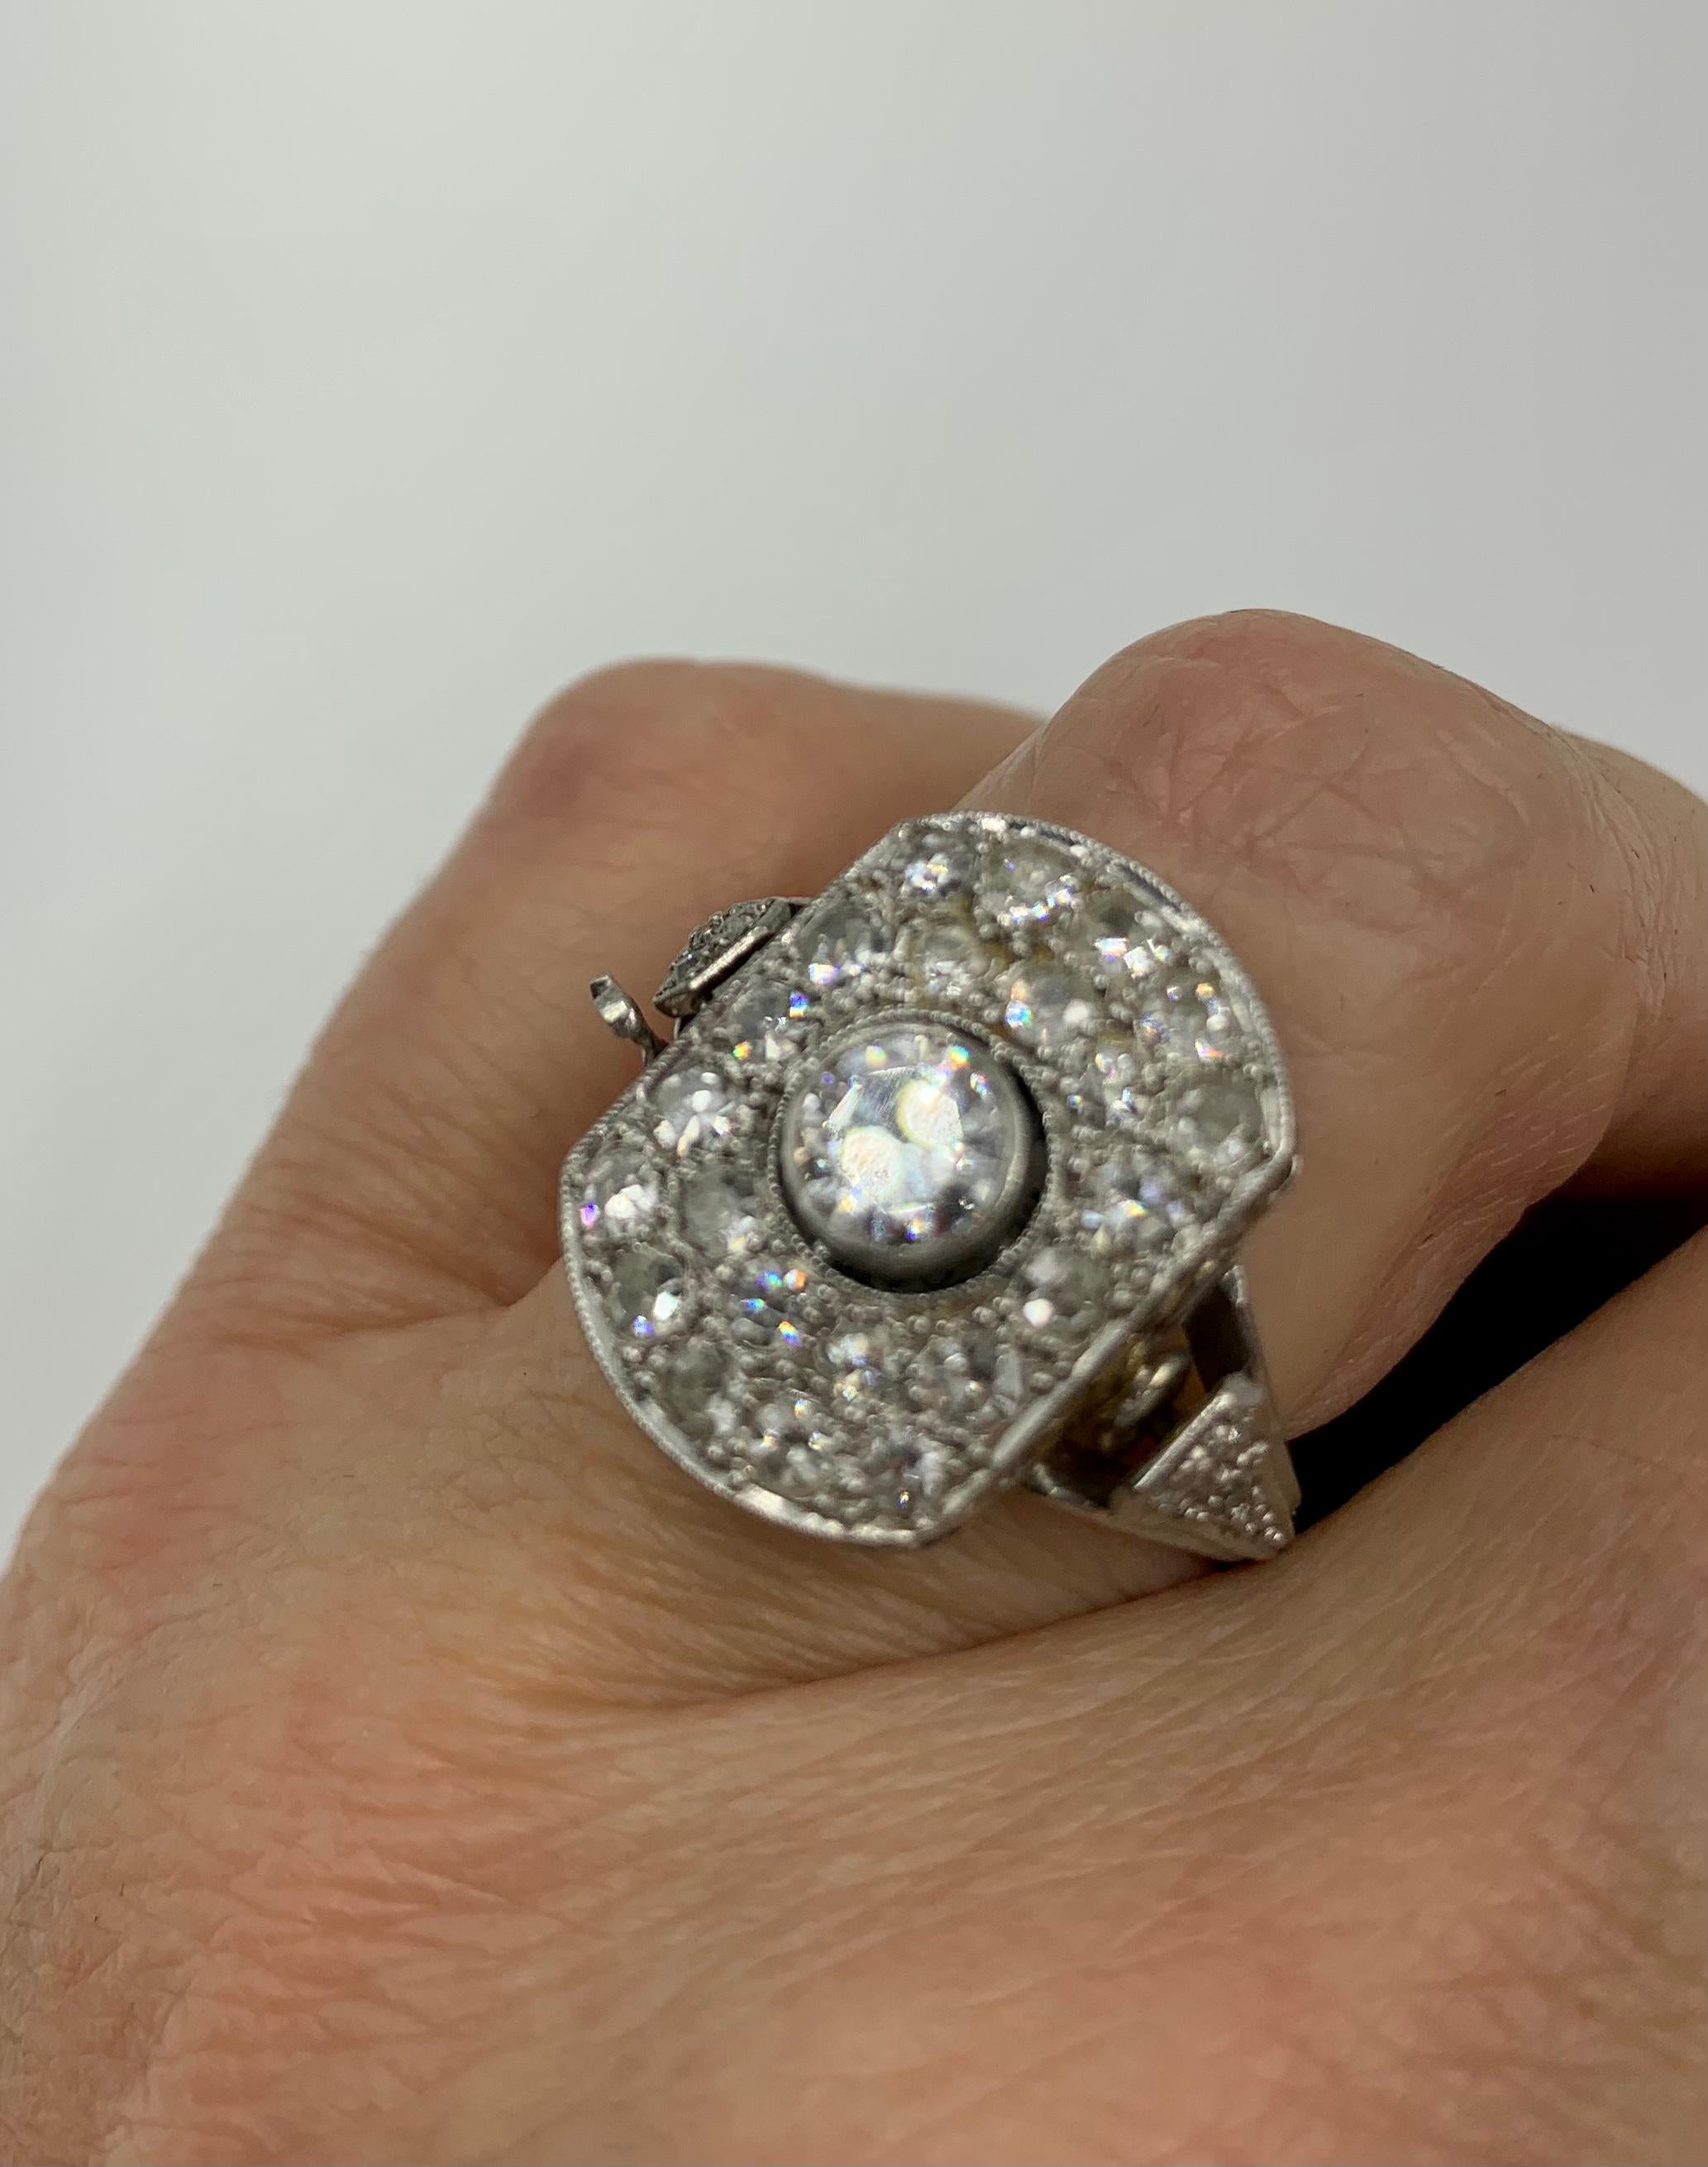 Rare Art Deco 2.30 TCW Diamond 14K White Gold Cocktail Ring with Concealed Watch For Sale 1